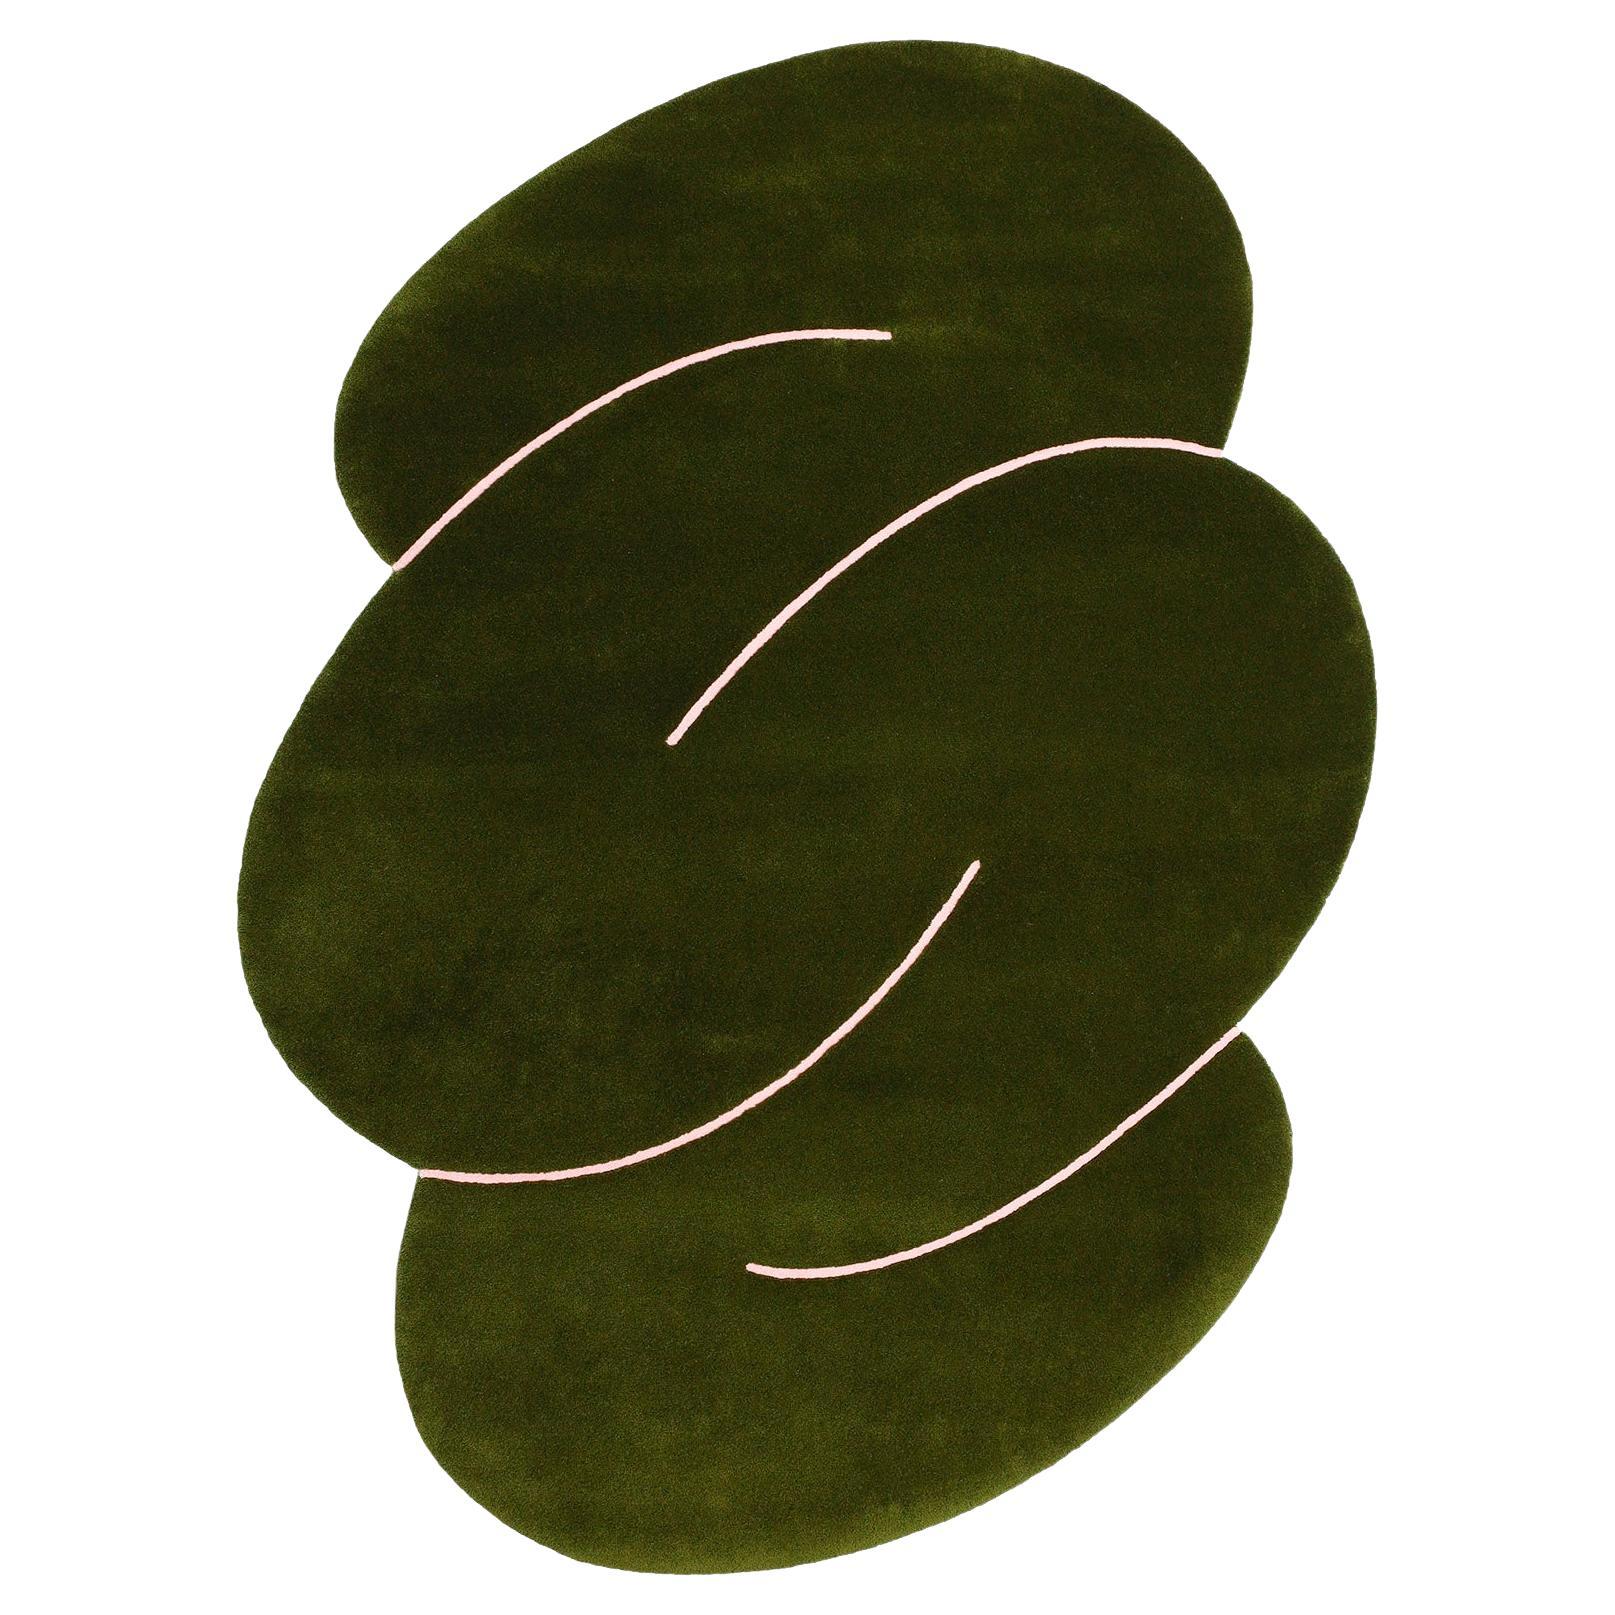 Okej - Moss Green Squiggle Rug 6 x 8 FT For Sale